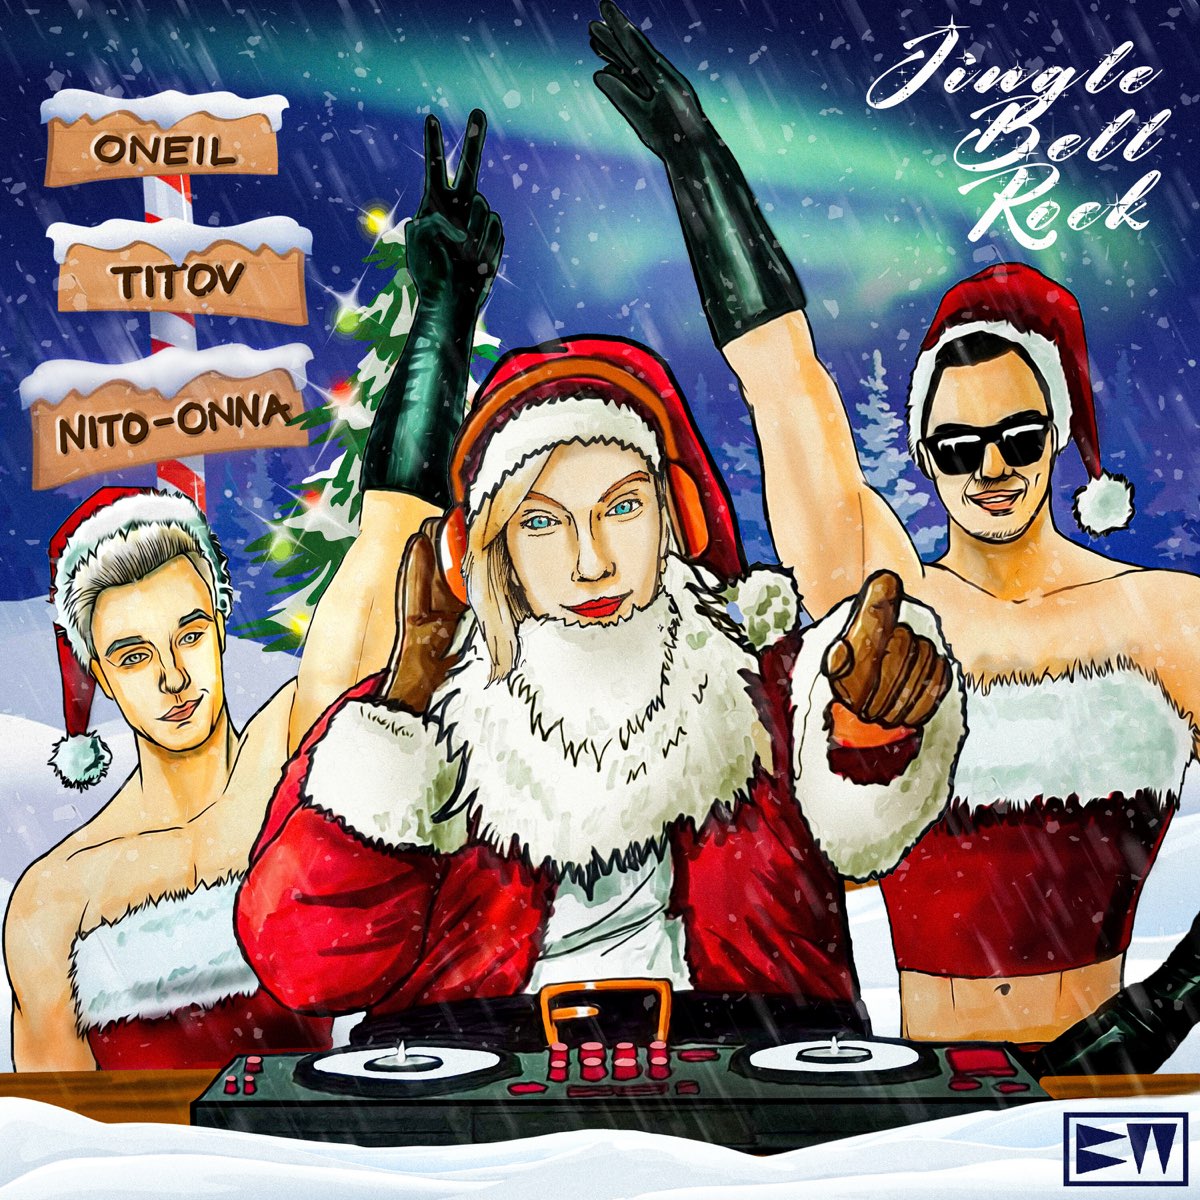 Jingle Bell Rock - Single by ONEIL, Titov & Nito-Onna.